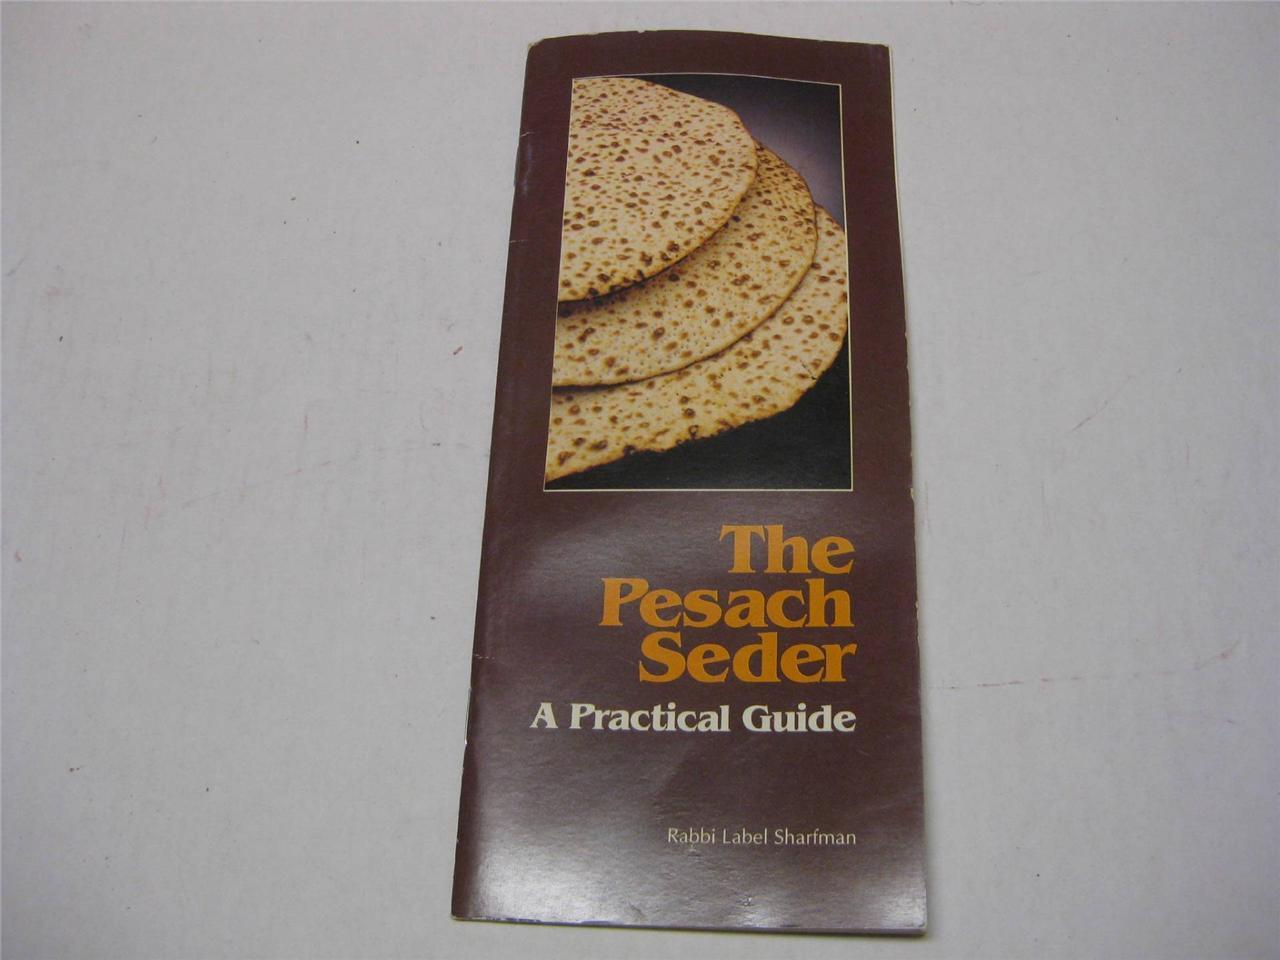 The Pesach seder: A practical guide by Label Sharfman      1994 by NCSY